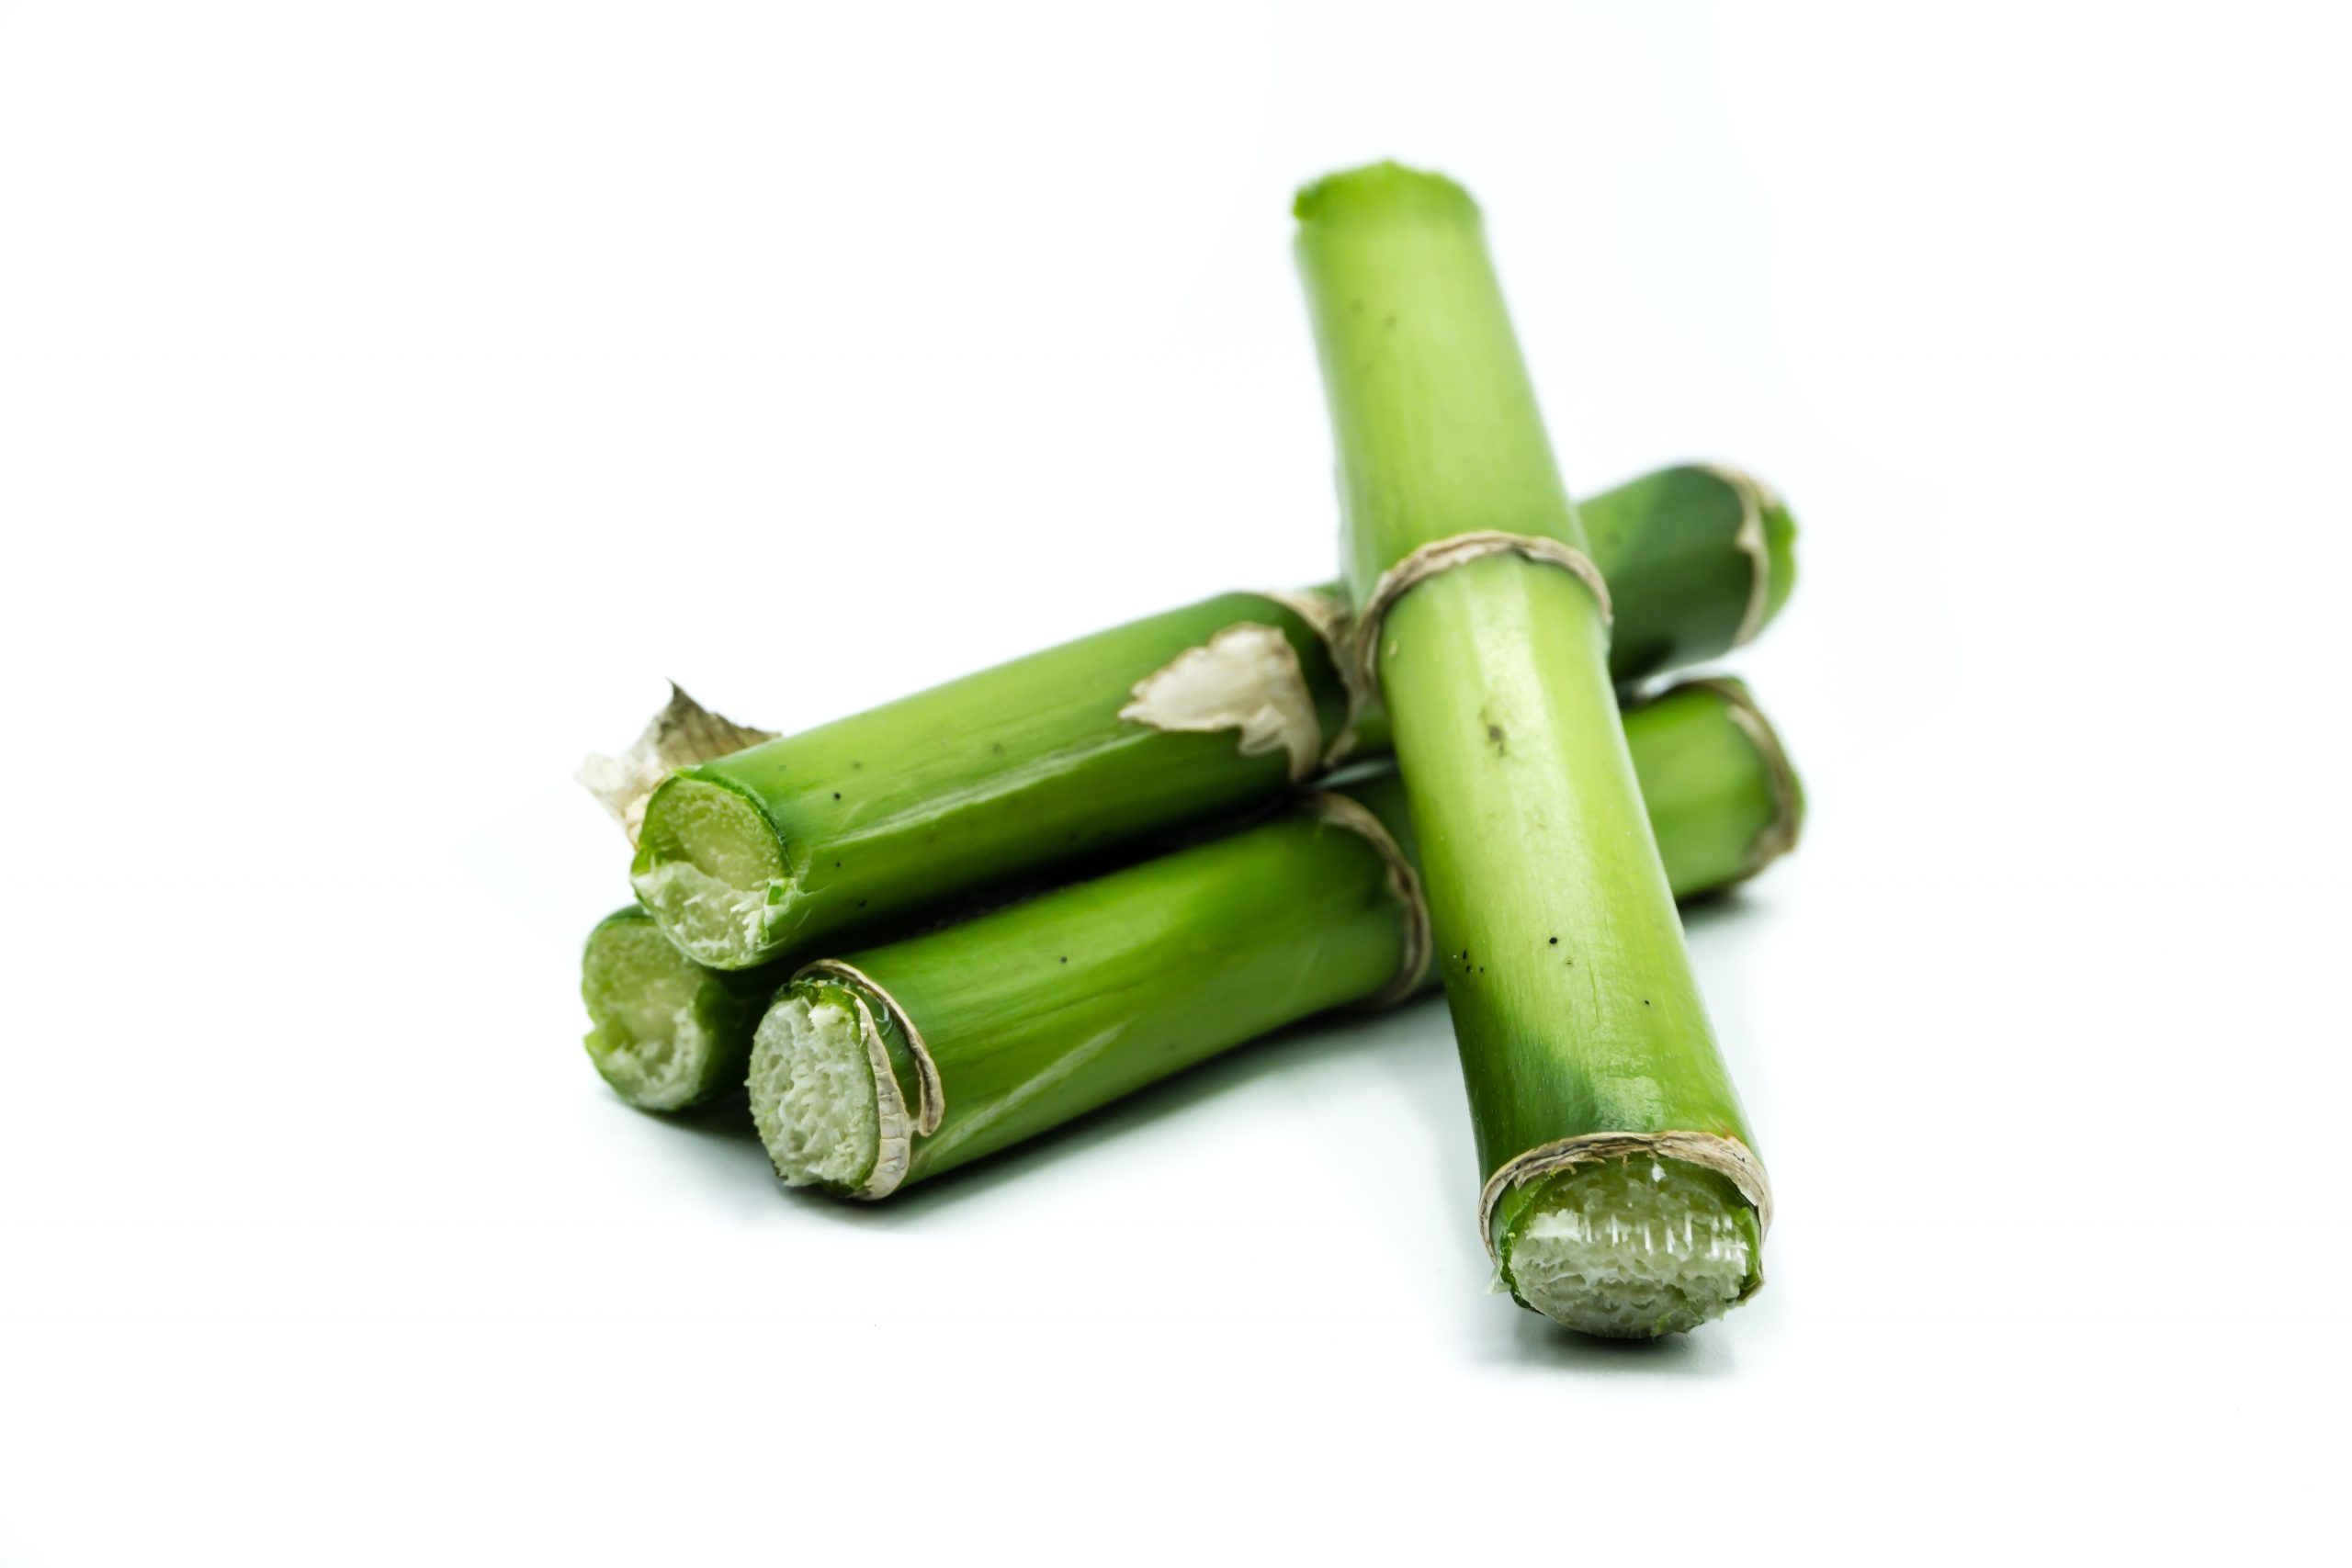 Bamboo Extract For Hair, Skin and Nails